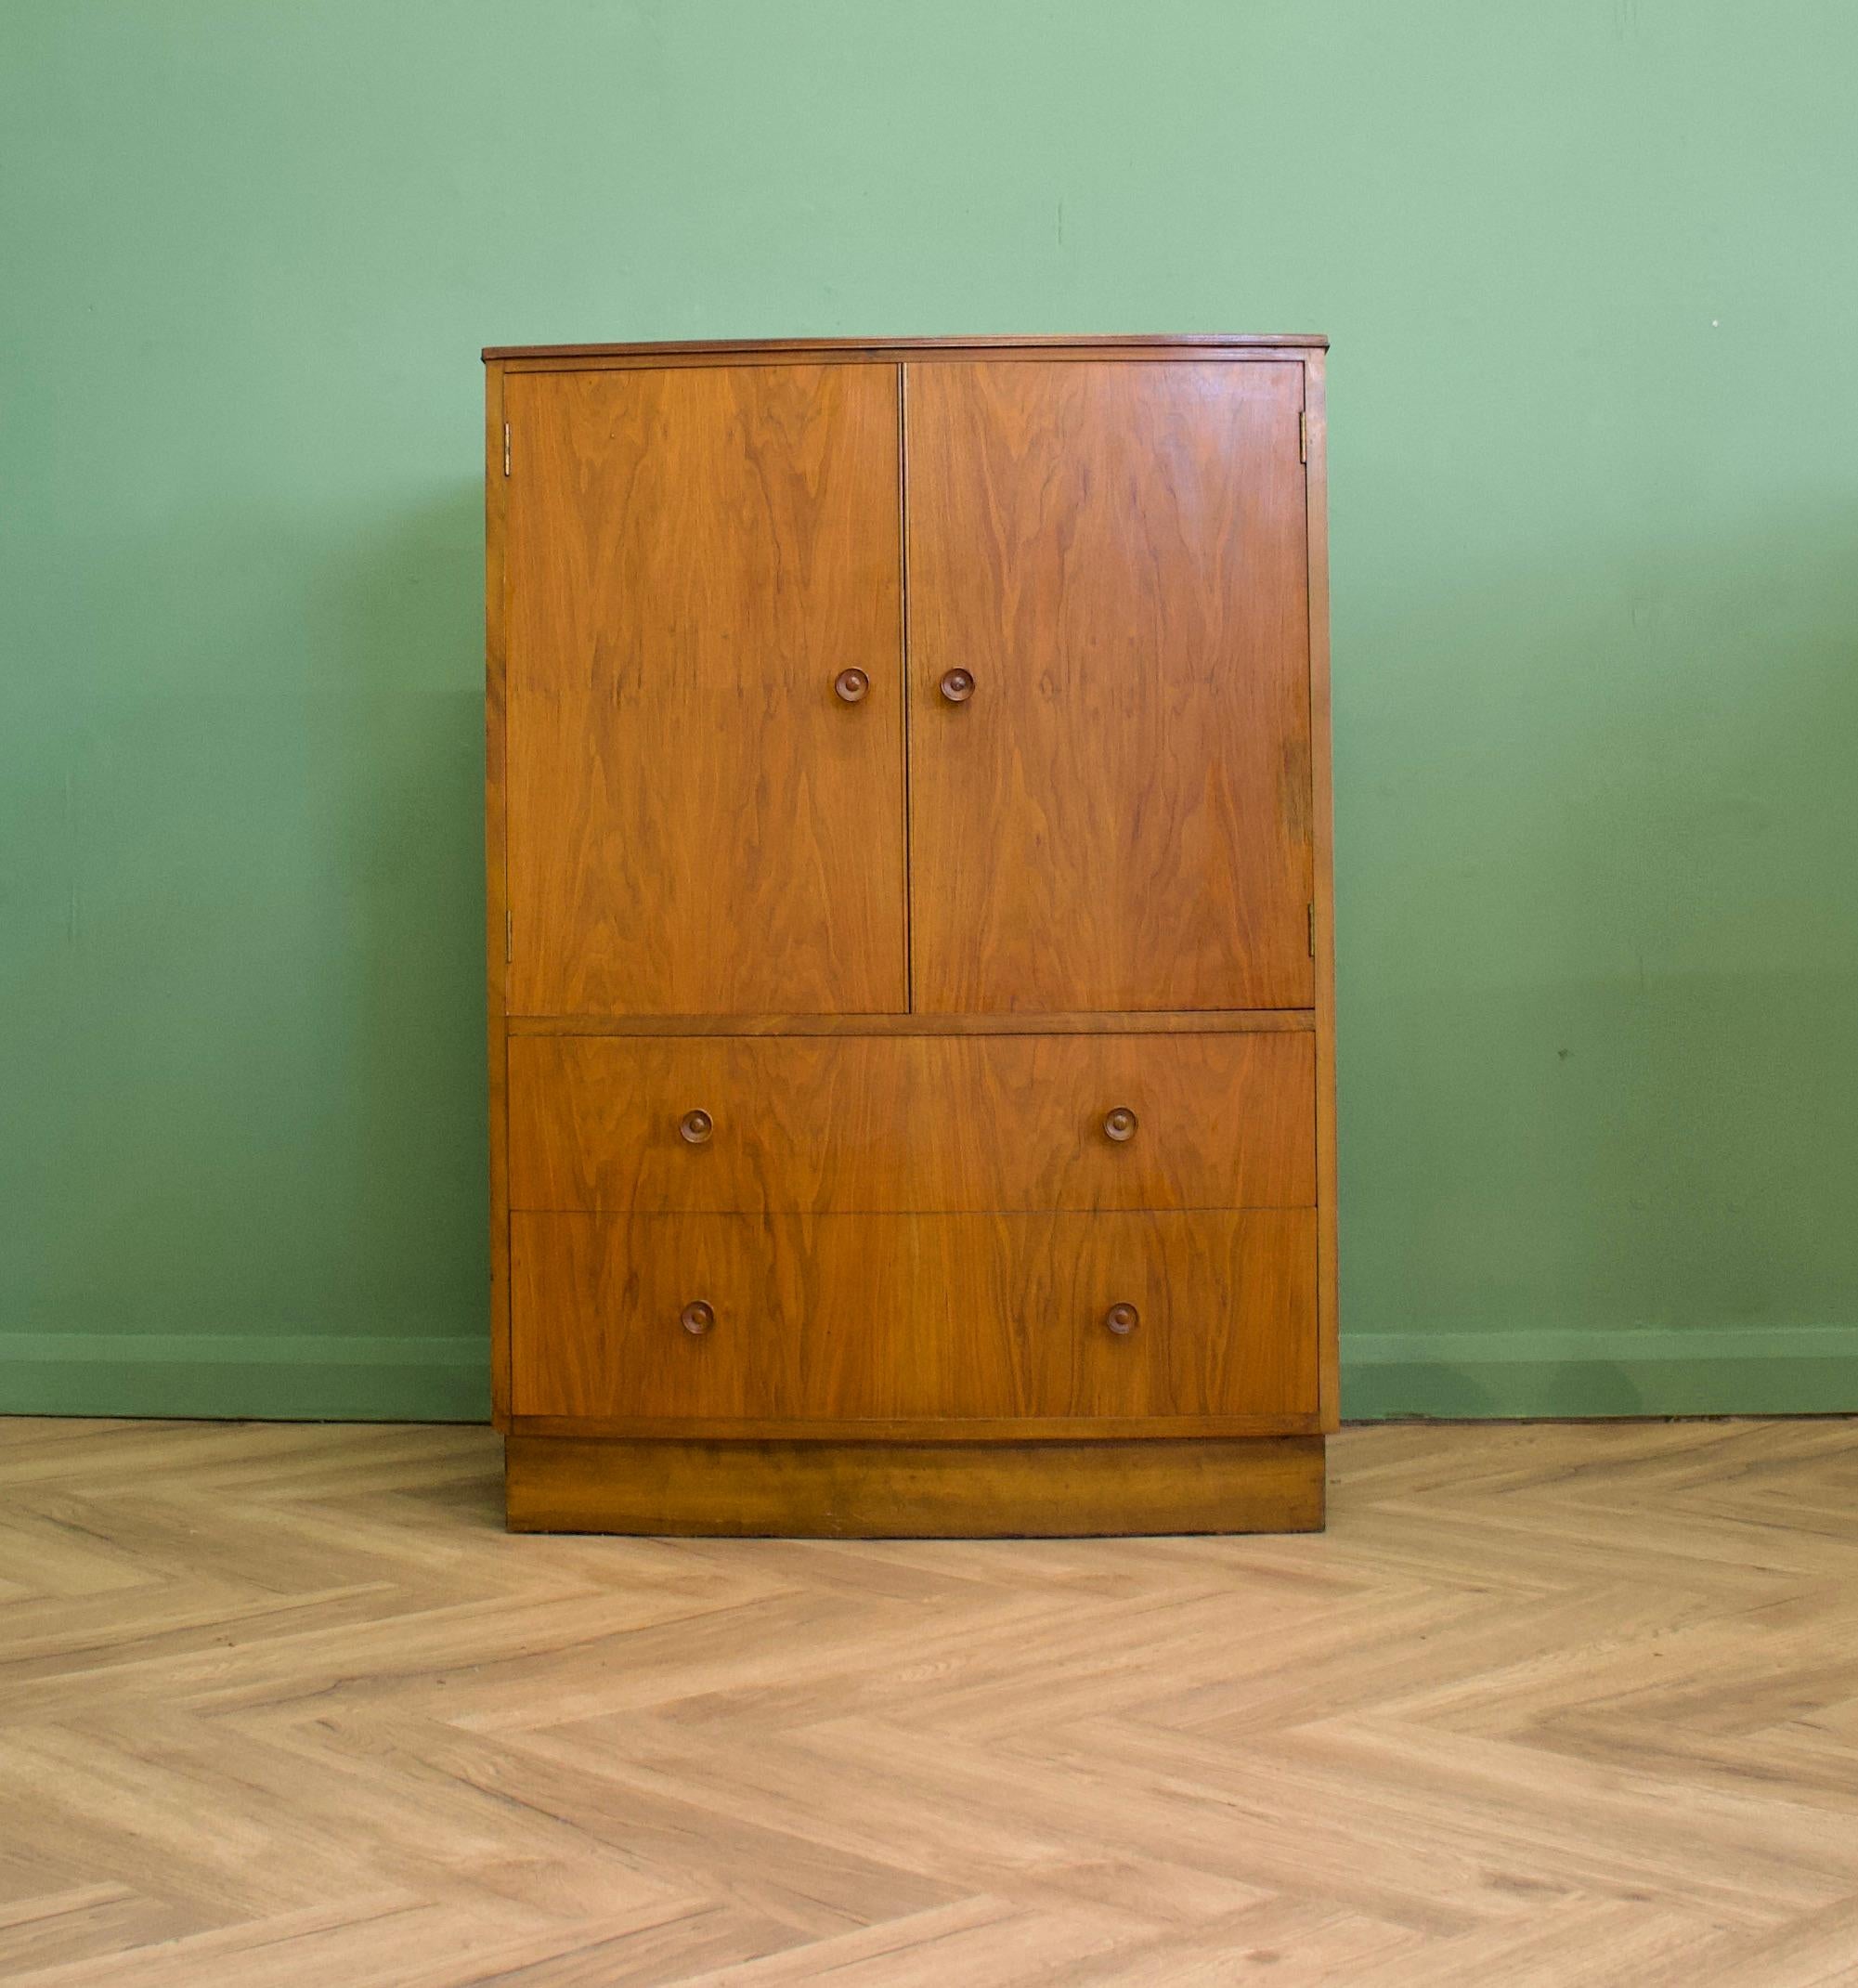 A vintage walnut Art Deco style tallboy or linen cabinet
Inside the top compartment, there are two shelves - the top is a more recent addition and is made out of plywood
There are two drawers to the bottom and it also features solid wood